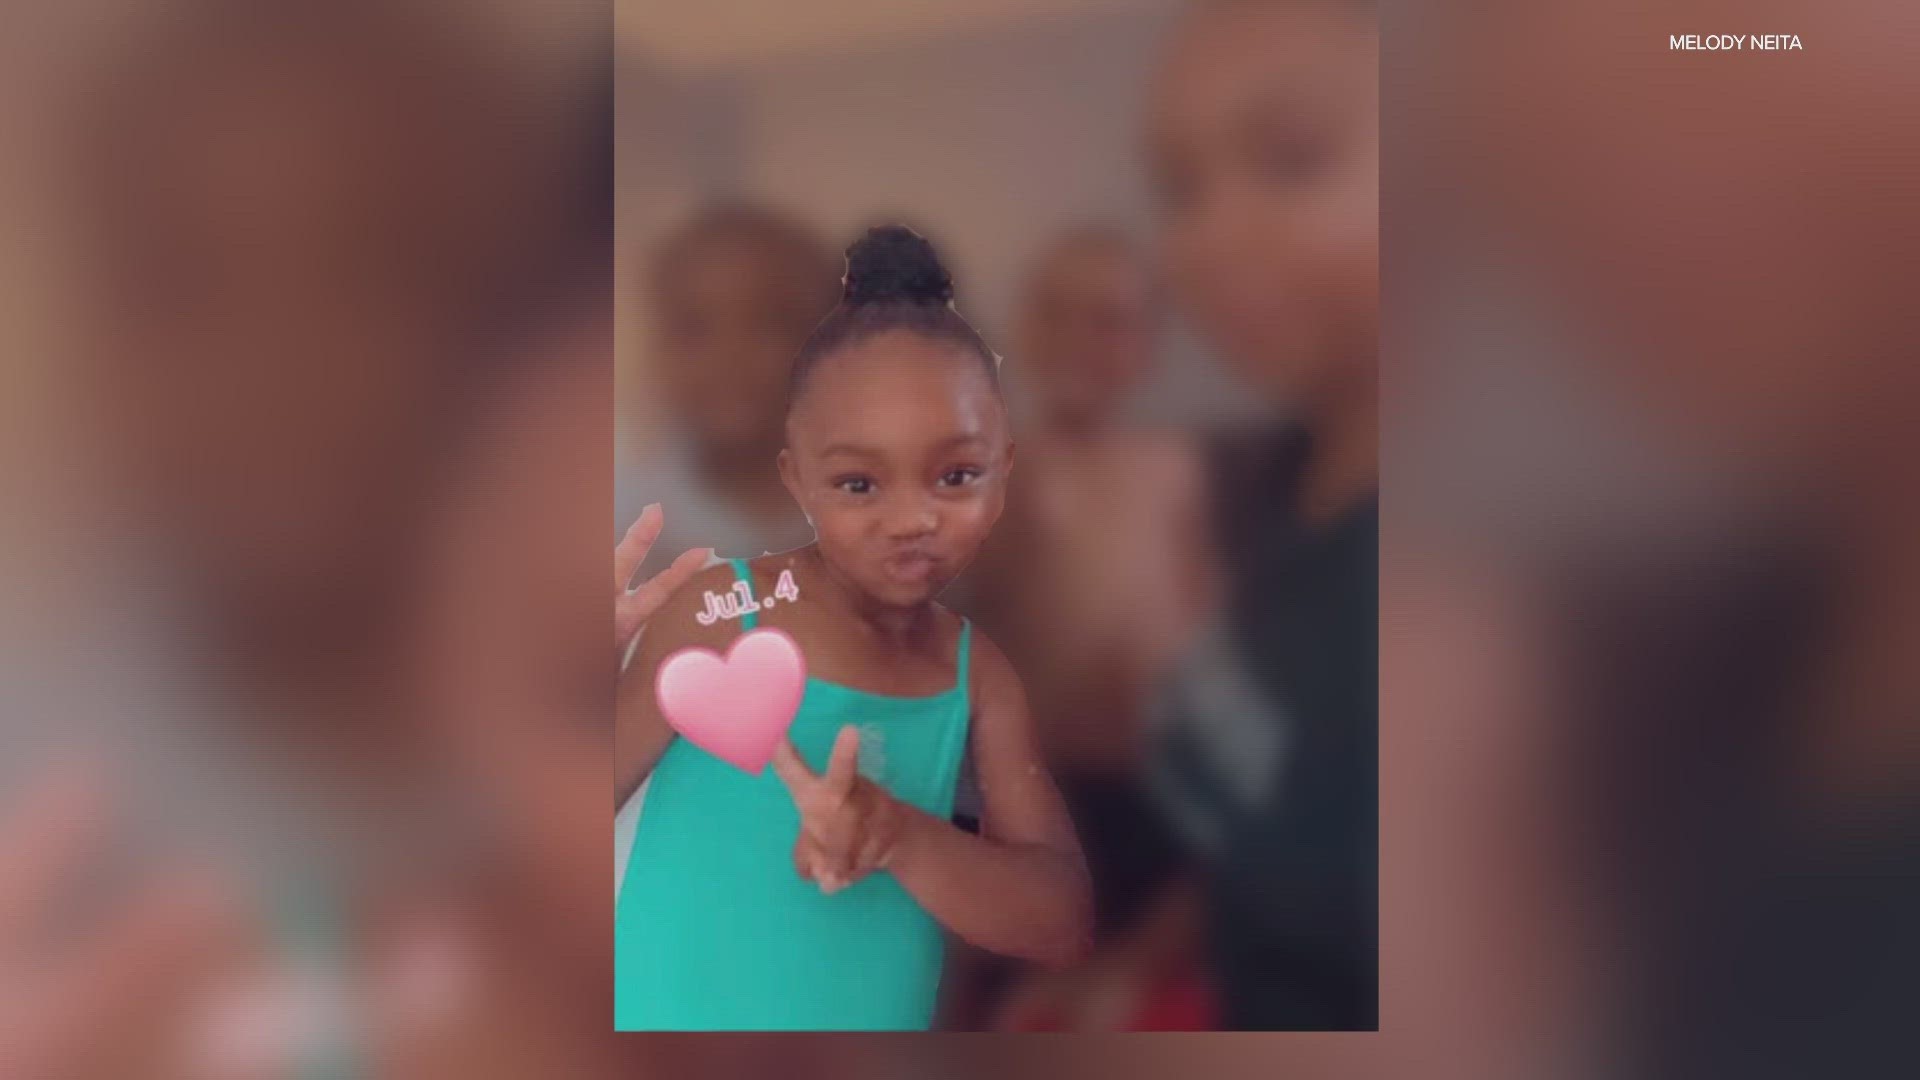 A mother is dealing with horrific grief after her 4-year-old daughter was shot and killed by her 5-year-old brother.